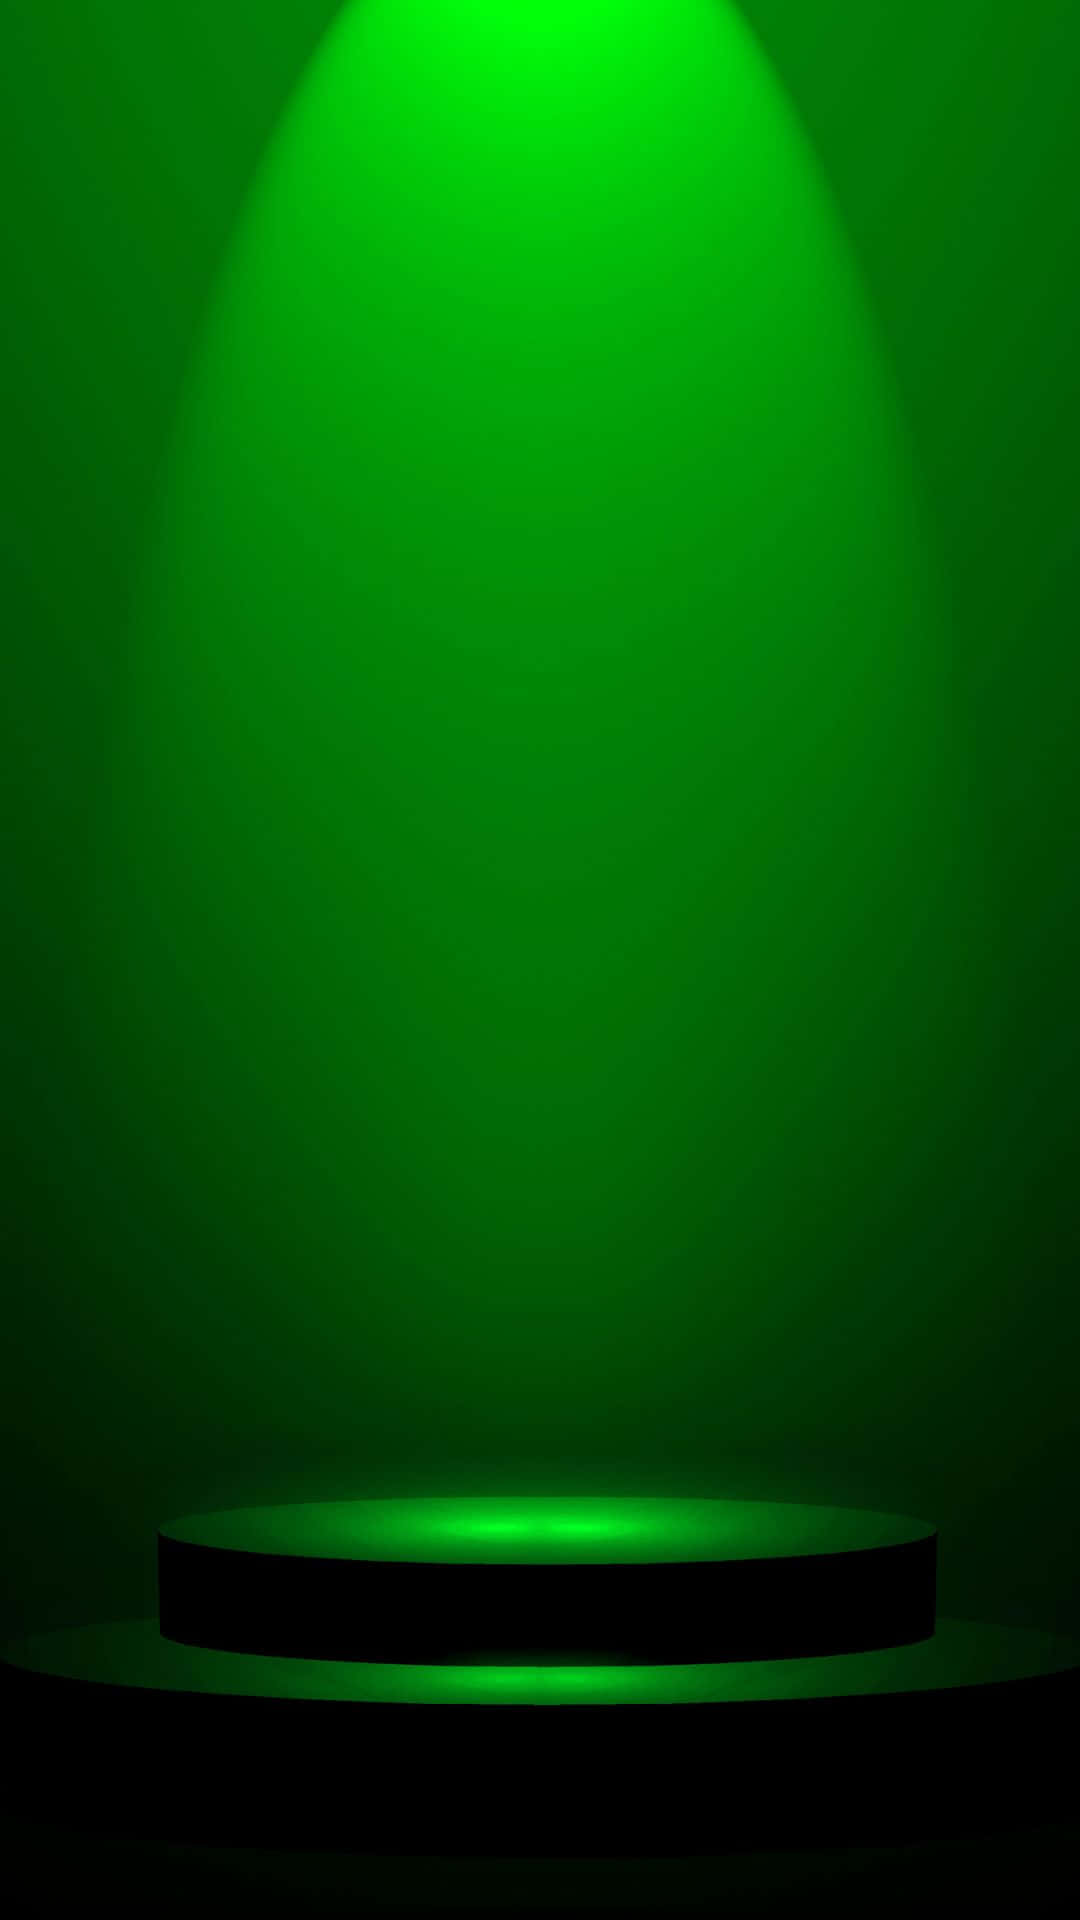 Stage With Green Light Vector